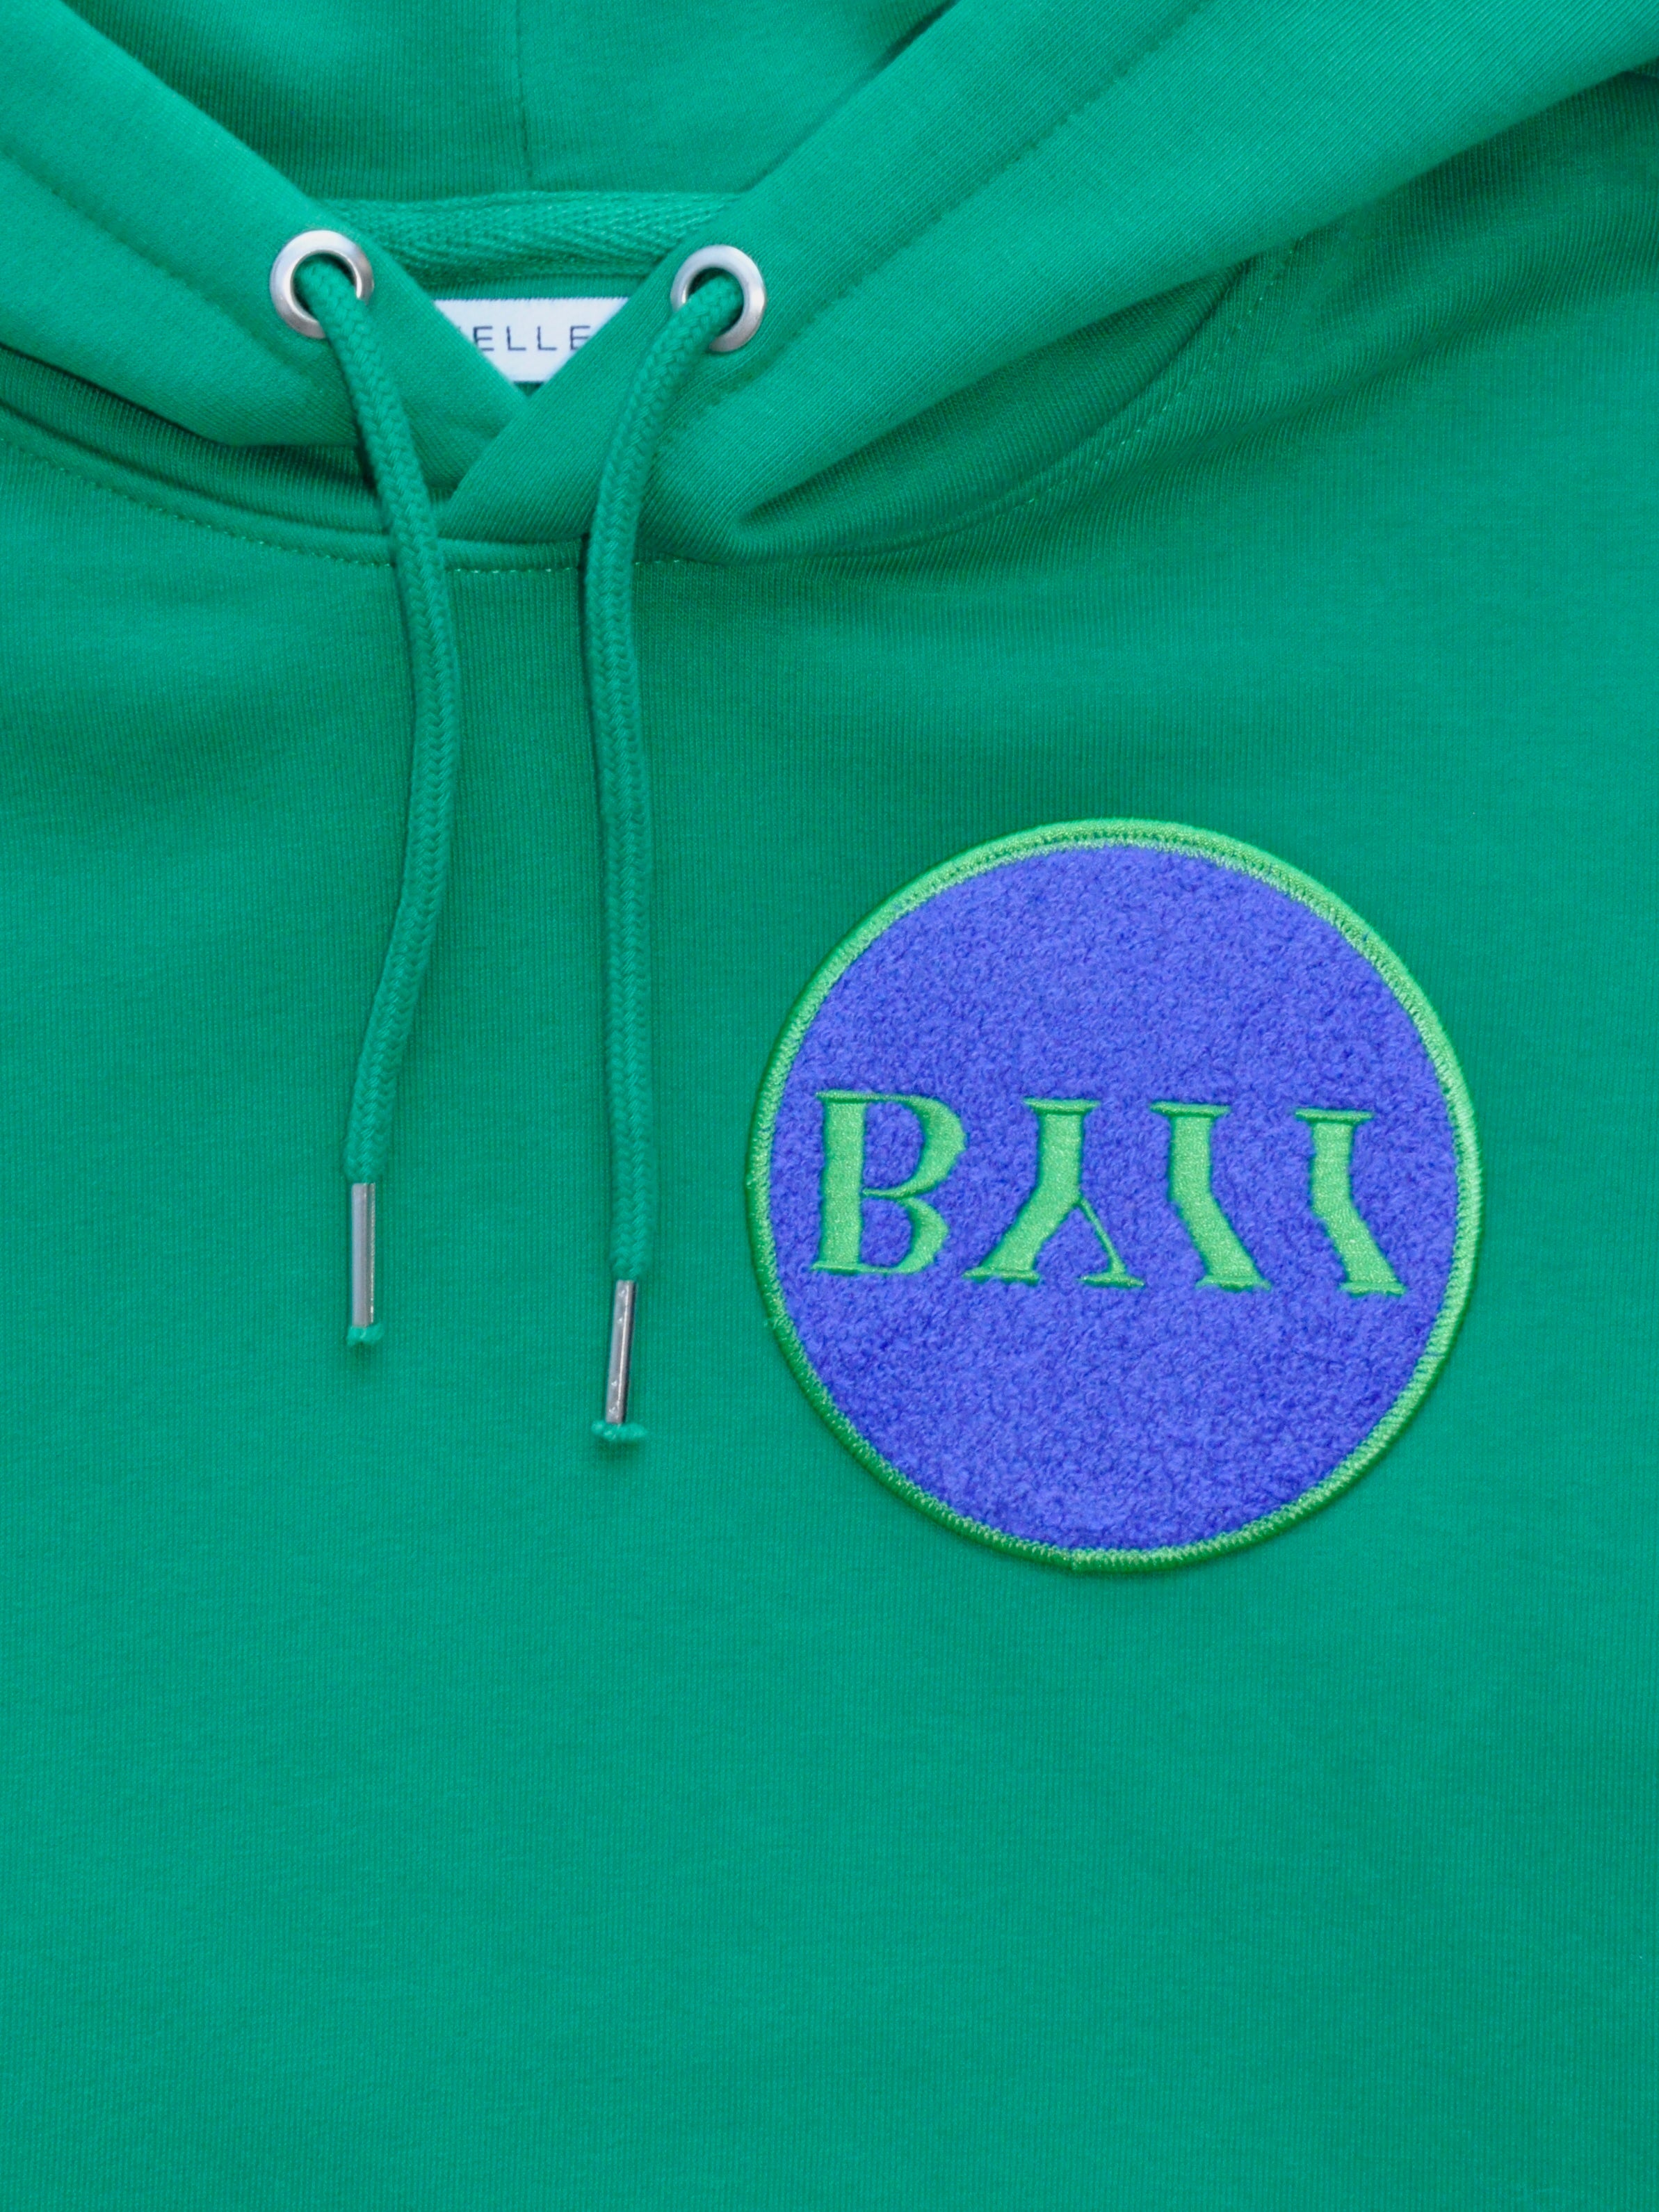 BY11 Organic Cotton Logo Patch Hoodie - Kelly Green & Royal Blue